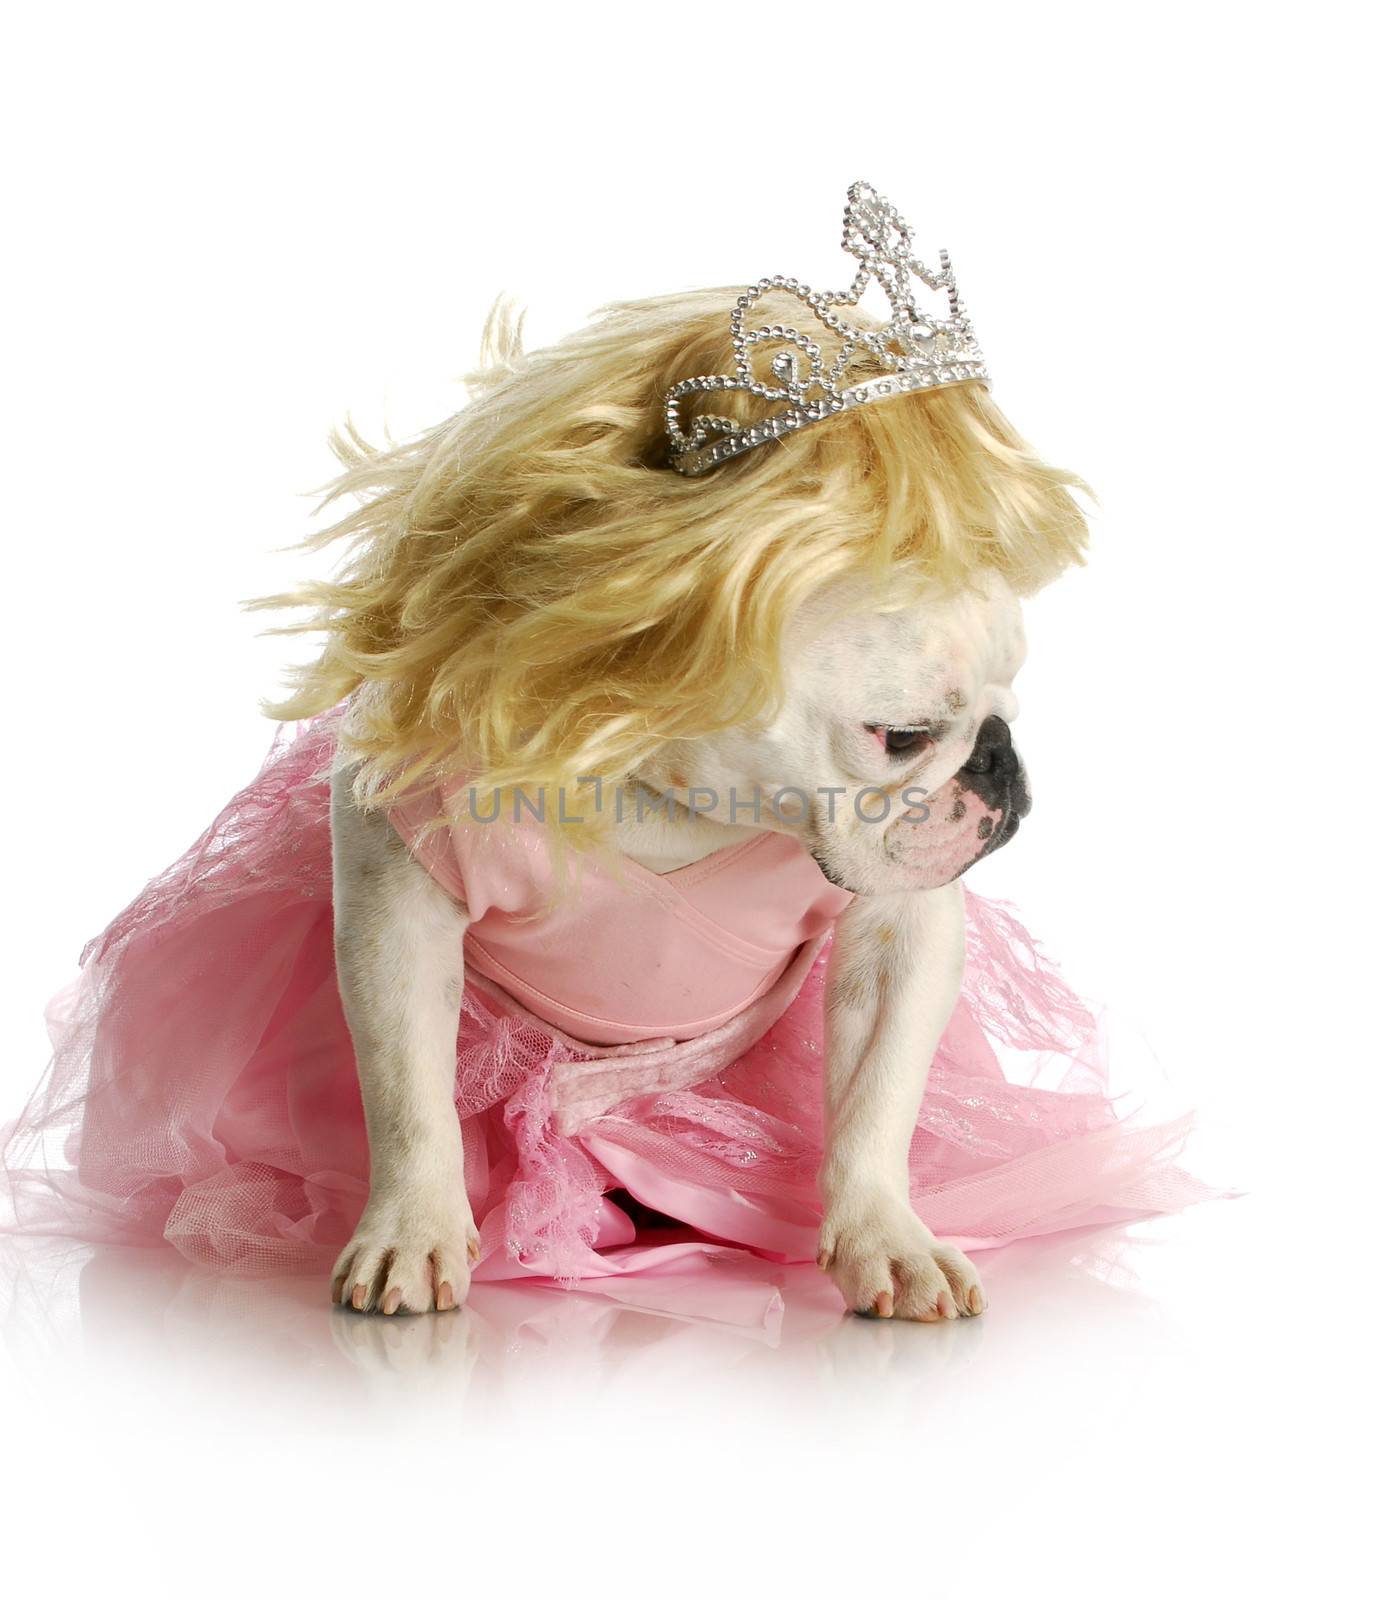 spoiled dog pouting - english bulldog dressed up with blond wig and pink tutu with sad expression